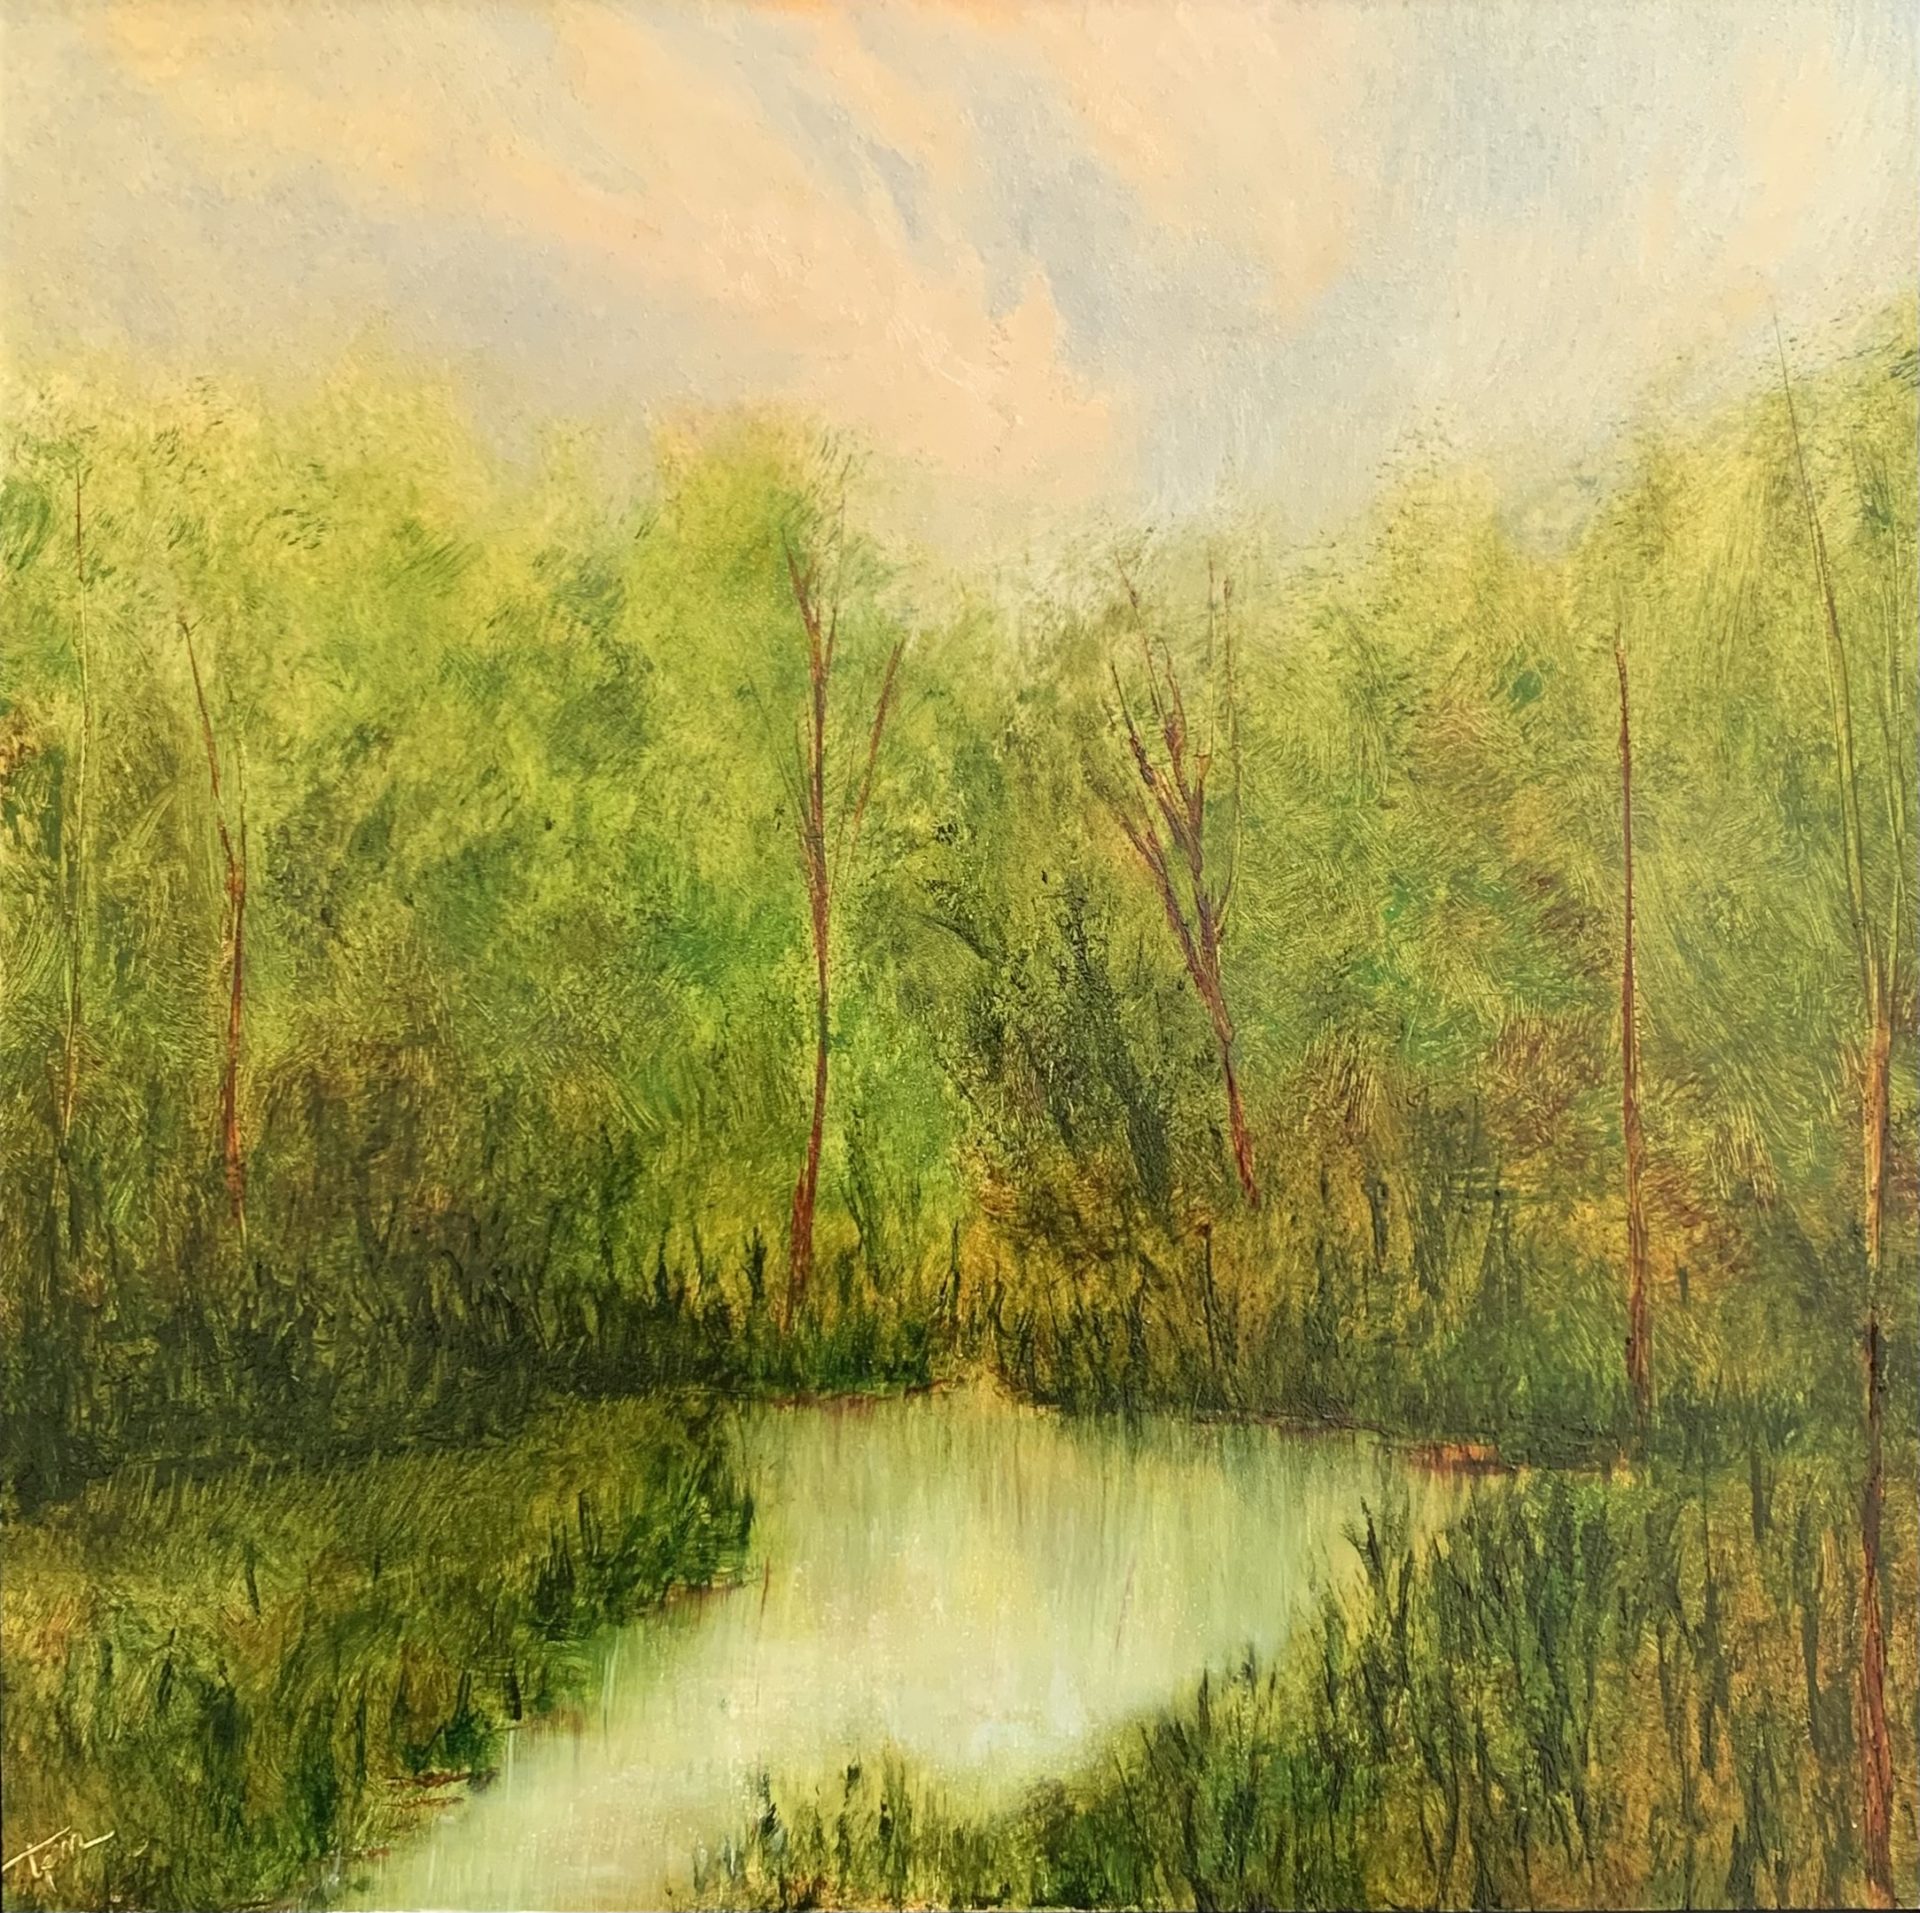 Original landscape oil painting by Tisha Mark, Spring's Promise Fulfilled (Week 15, 52 Weeks of Finding Light Series), 8"x8" oil on gessobord (2023). Painting shows lush, soft green landscape with a body of water. Light light from a pastel orange and grayish-blue sky reflects in the water below.